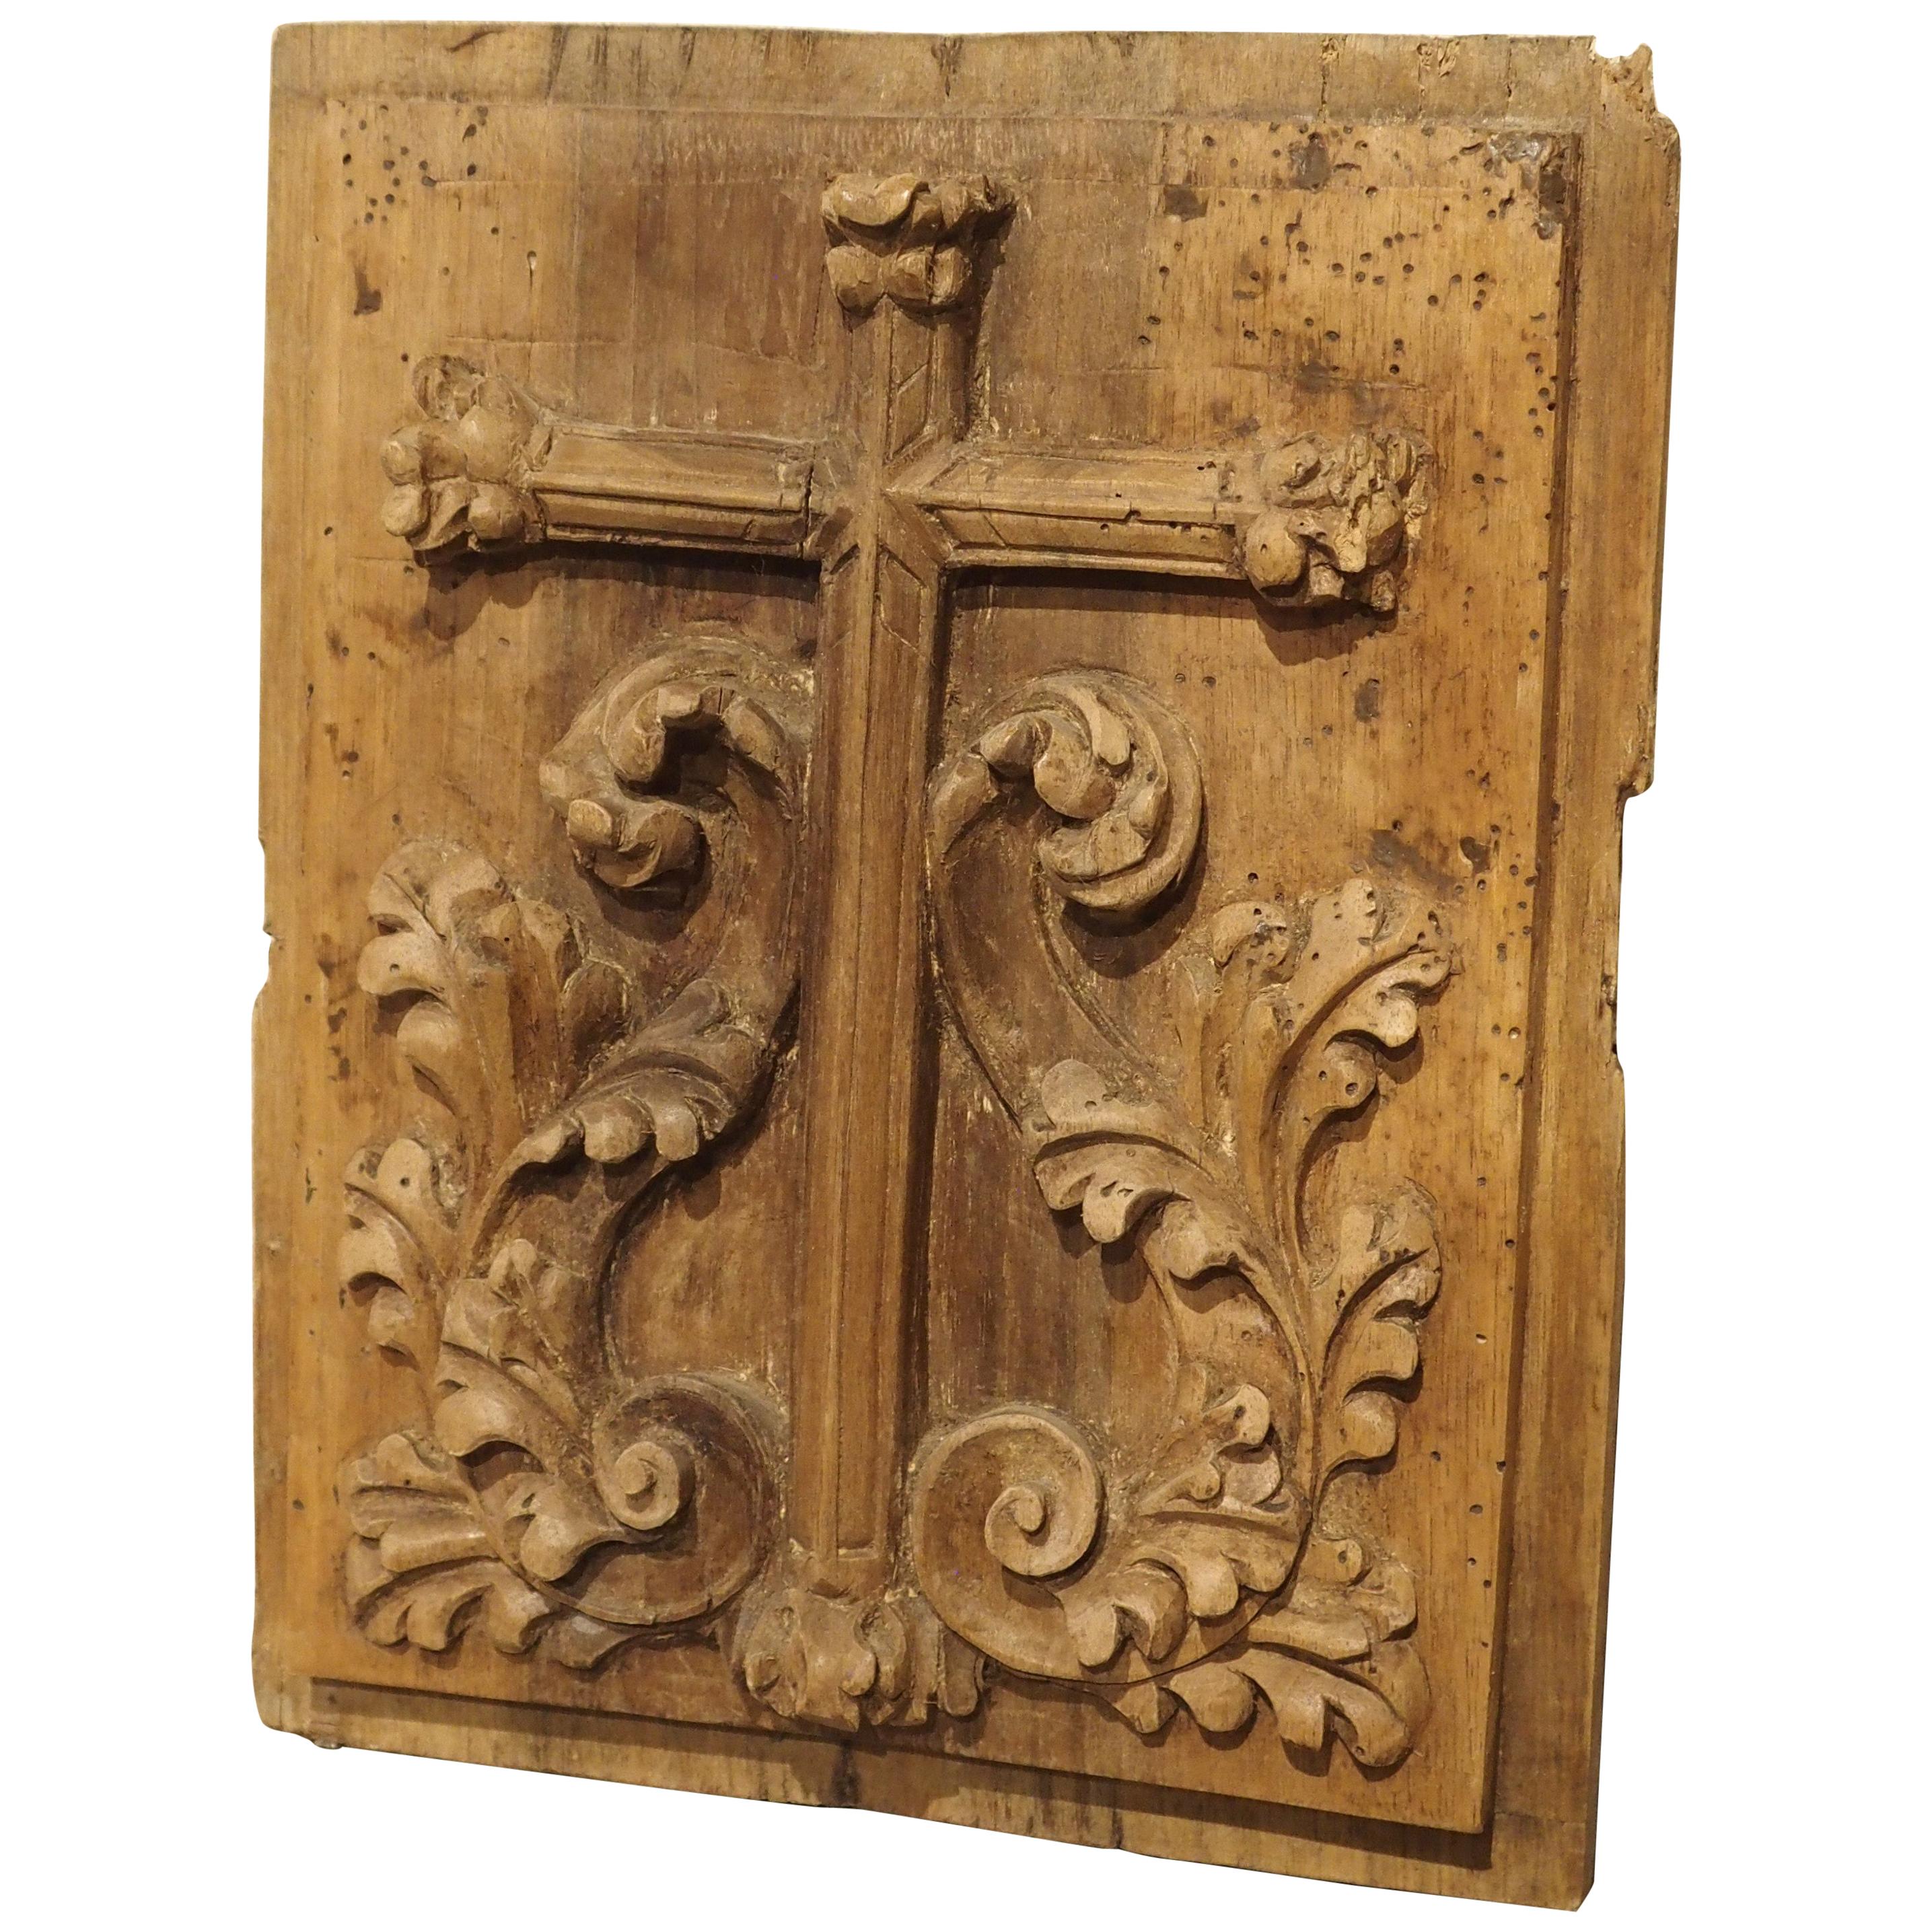 Small Carved Fruitwood Tabernacle Panel from France, circa 1700